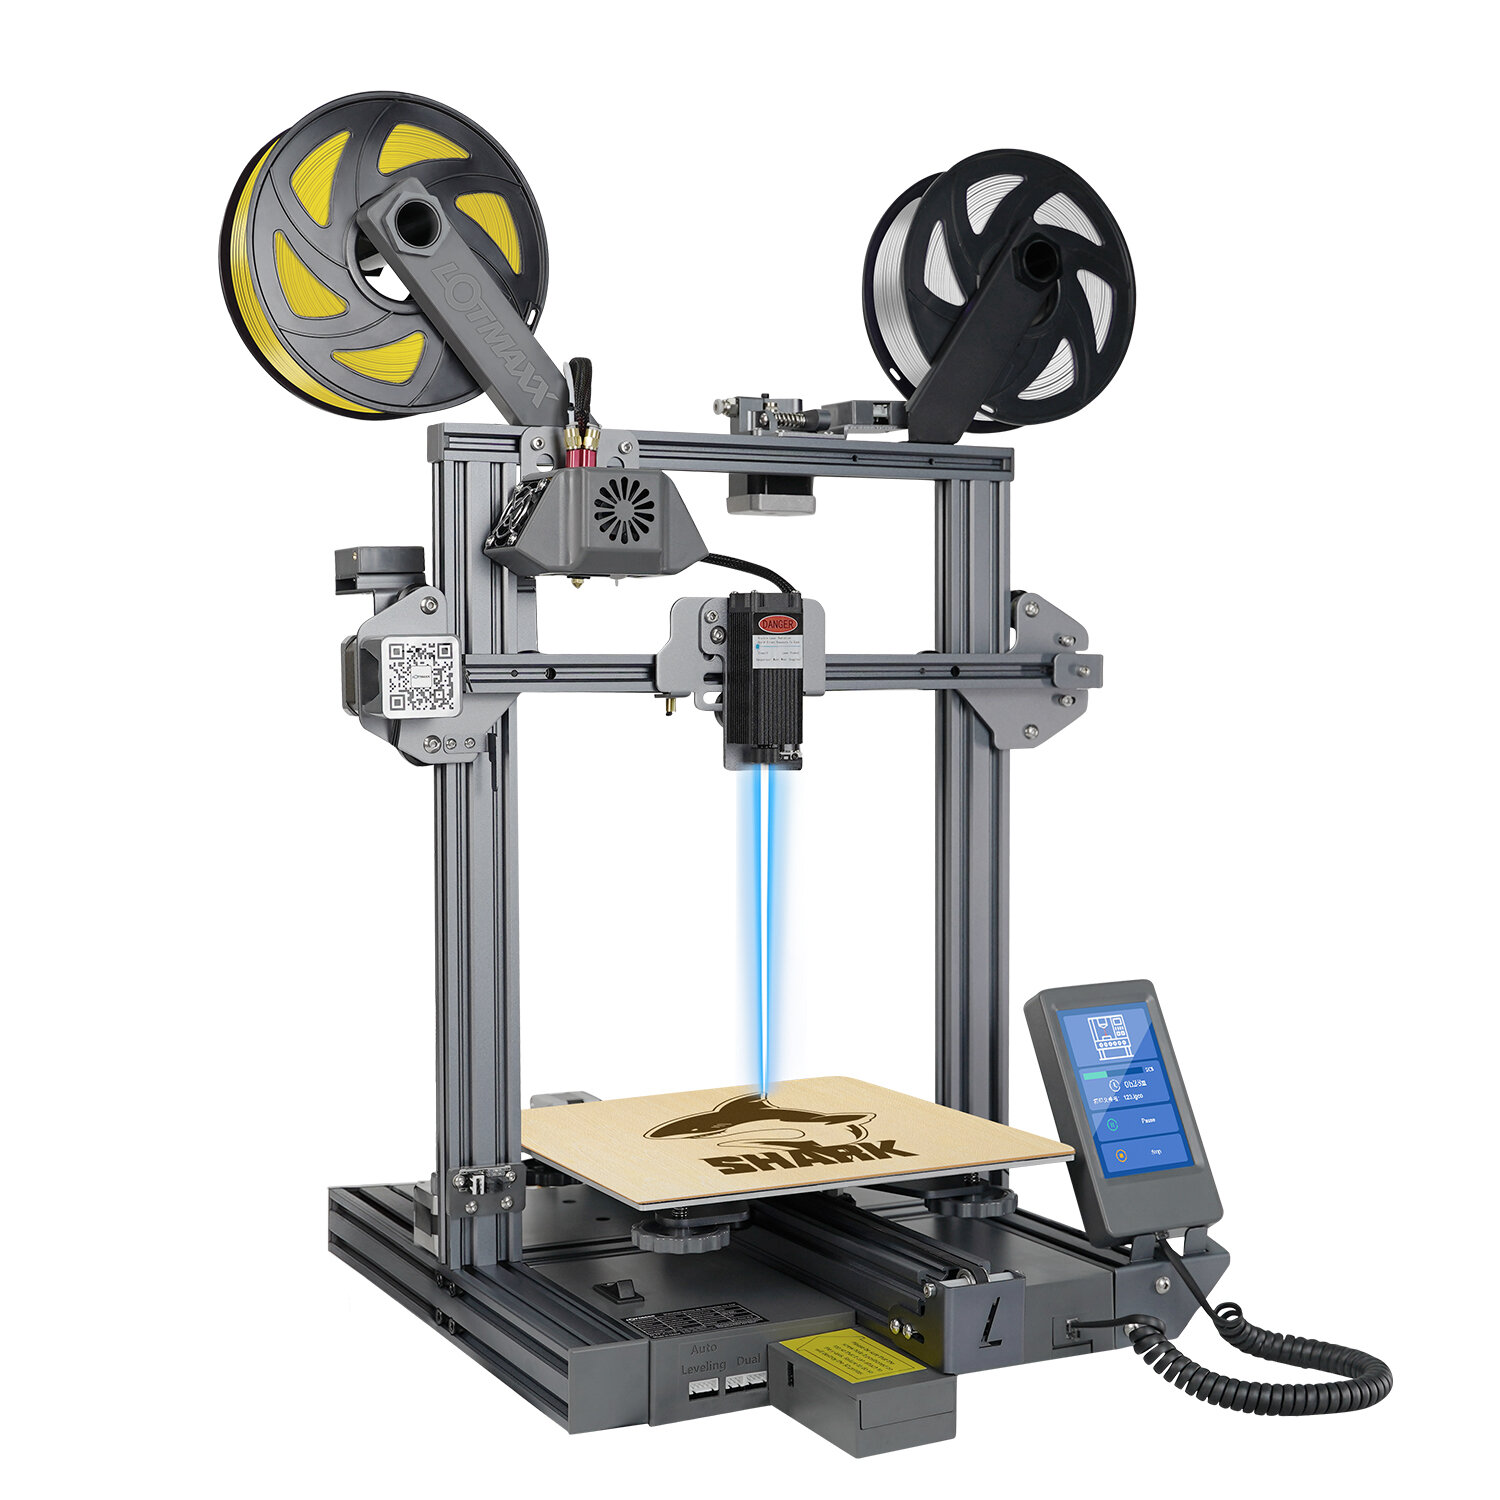 LOTMAXX SC-10 SHARK 3D Printer 235*235*265mm Print Size Support Laser Engraving /Auto Leveling/Dual Color Print With 3.5inch Movable Screen/8 Languages Translate